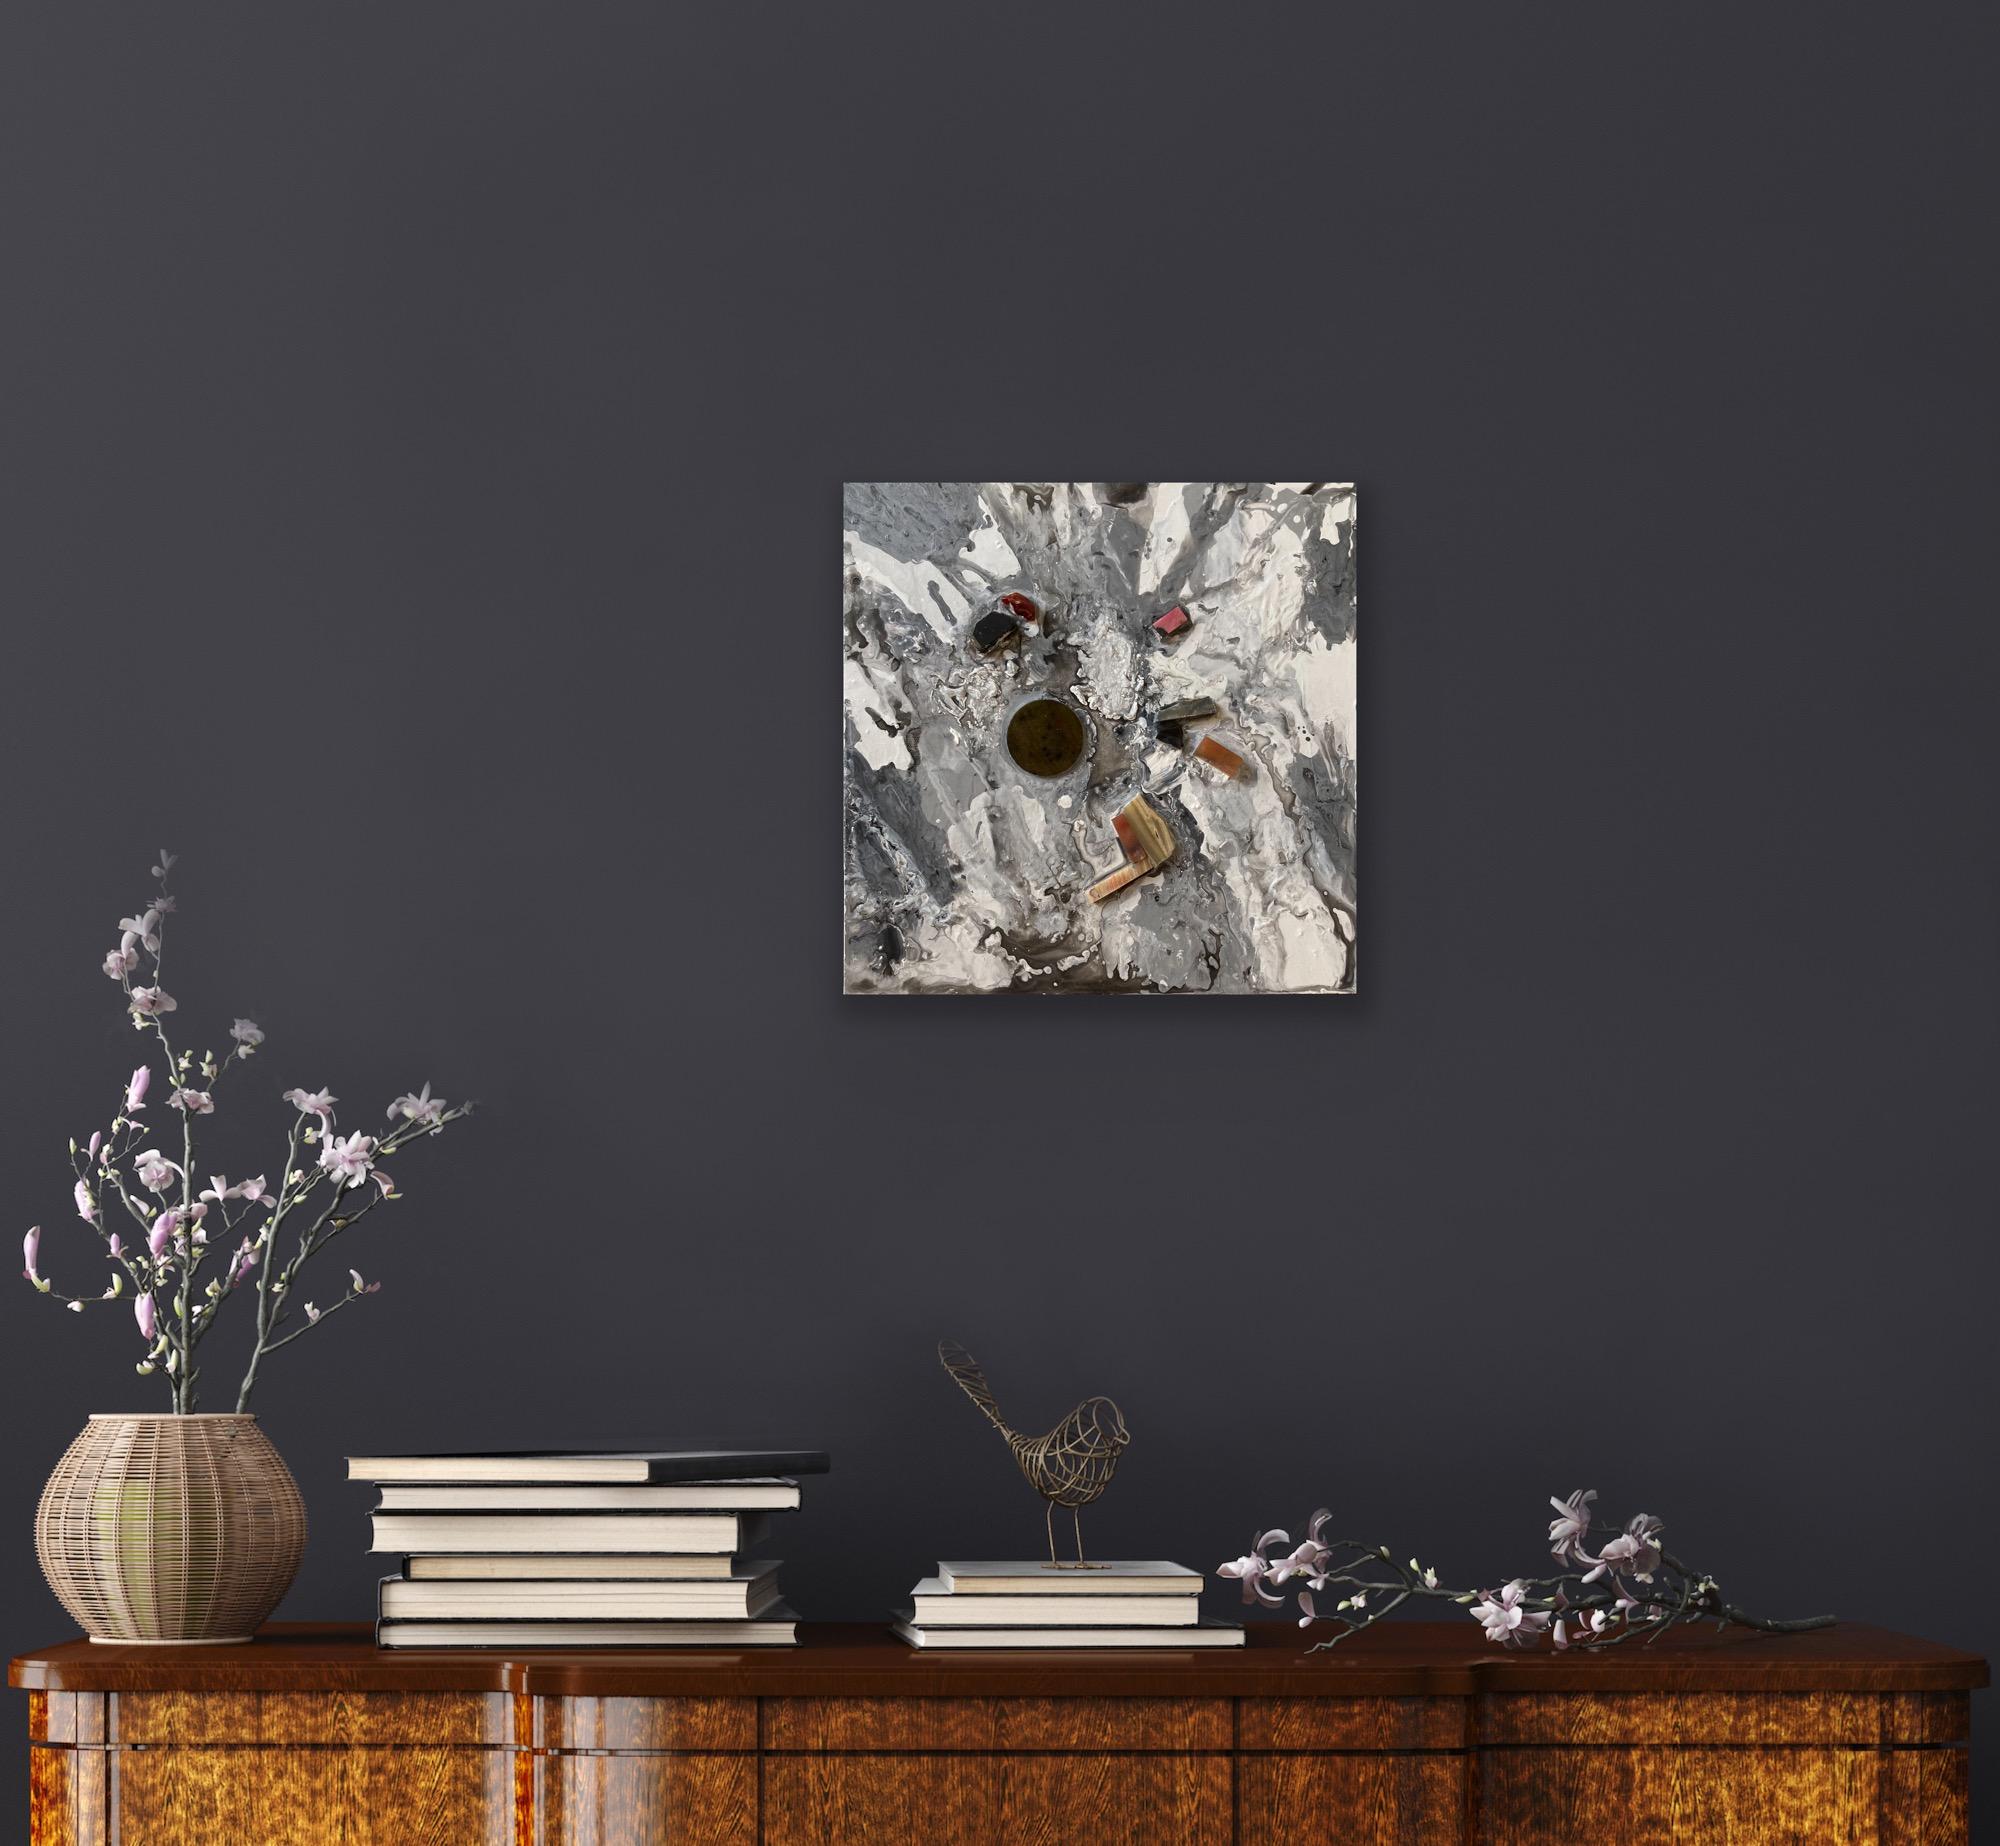 Square composition made on medium-density fiberboard with acrylic paints, as well as texture paste with sand and coffee and natural stones and minerals. It is covered with a durable acrylic varnish. Suitable for all types of modern interiors.
We all